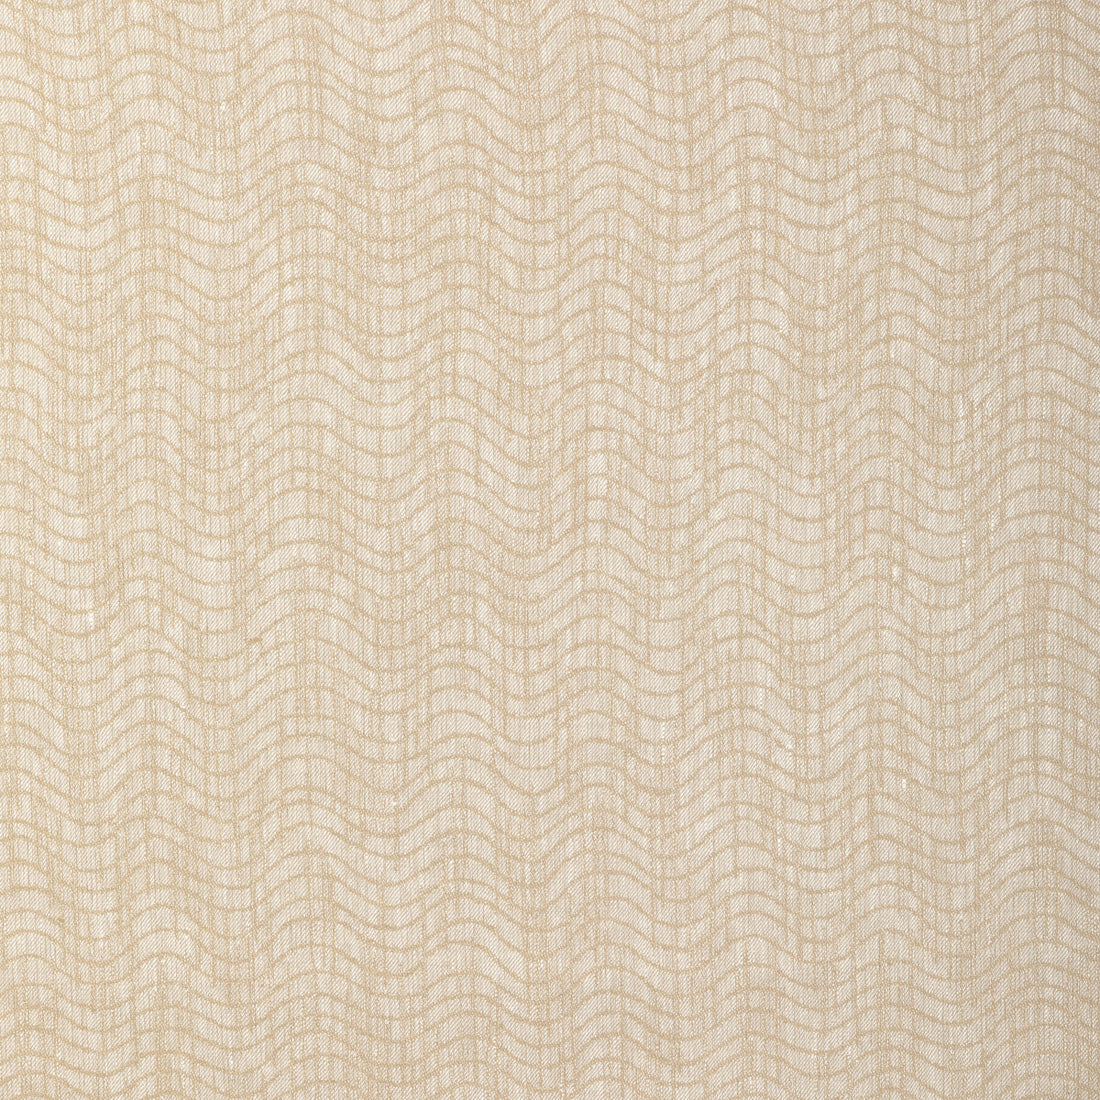 Dadami fabric in honey color - pattern GWF-3801.116.0 - by Lee Jofa Modern in the Kelly Wearstler VIII collection